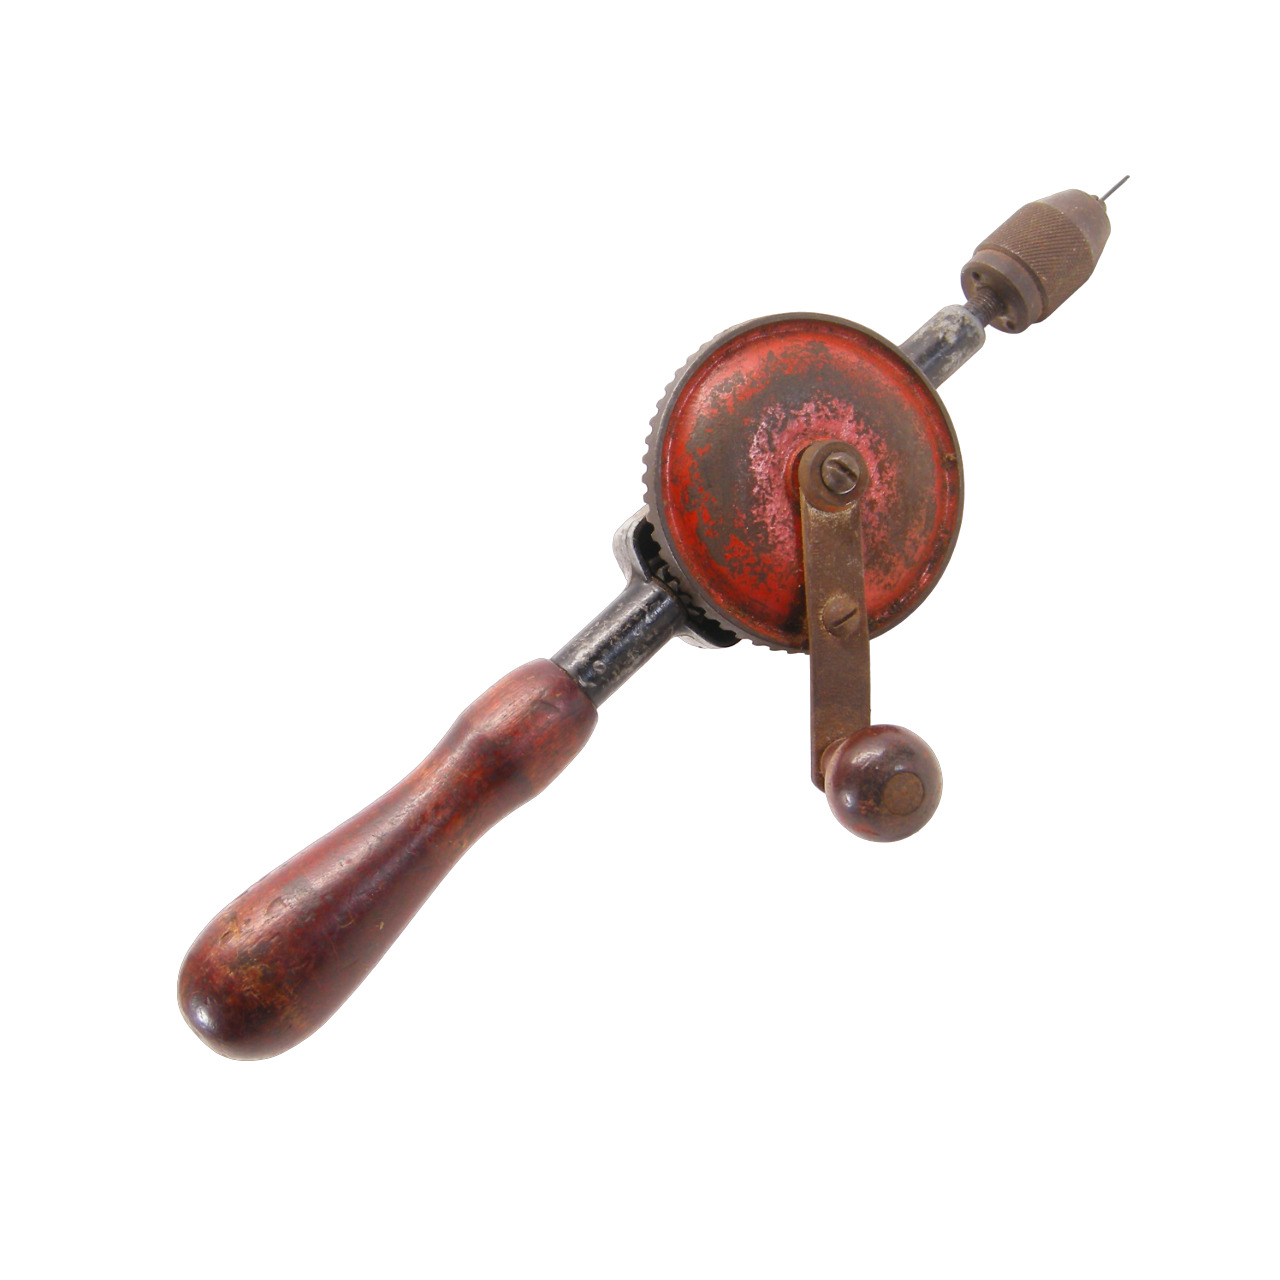 Hand Drill Crank with Wooden Handle Eggbeater Style - VINTAGE